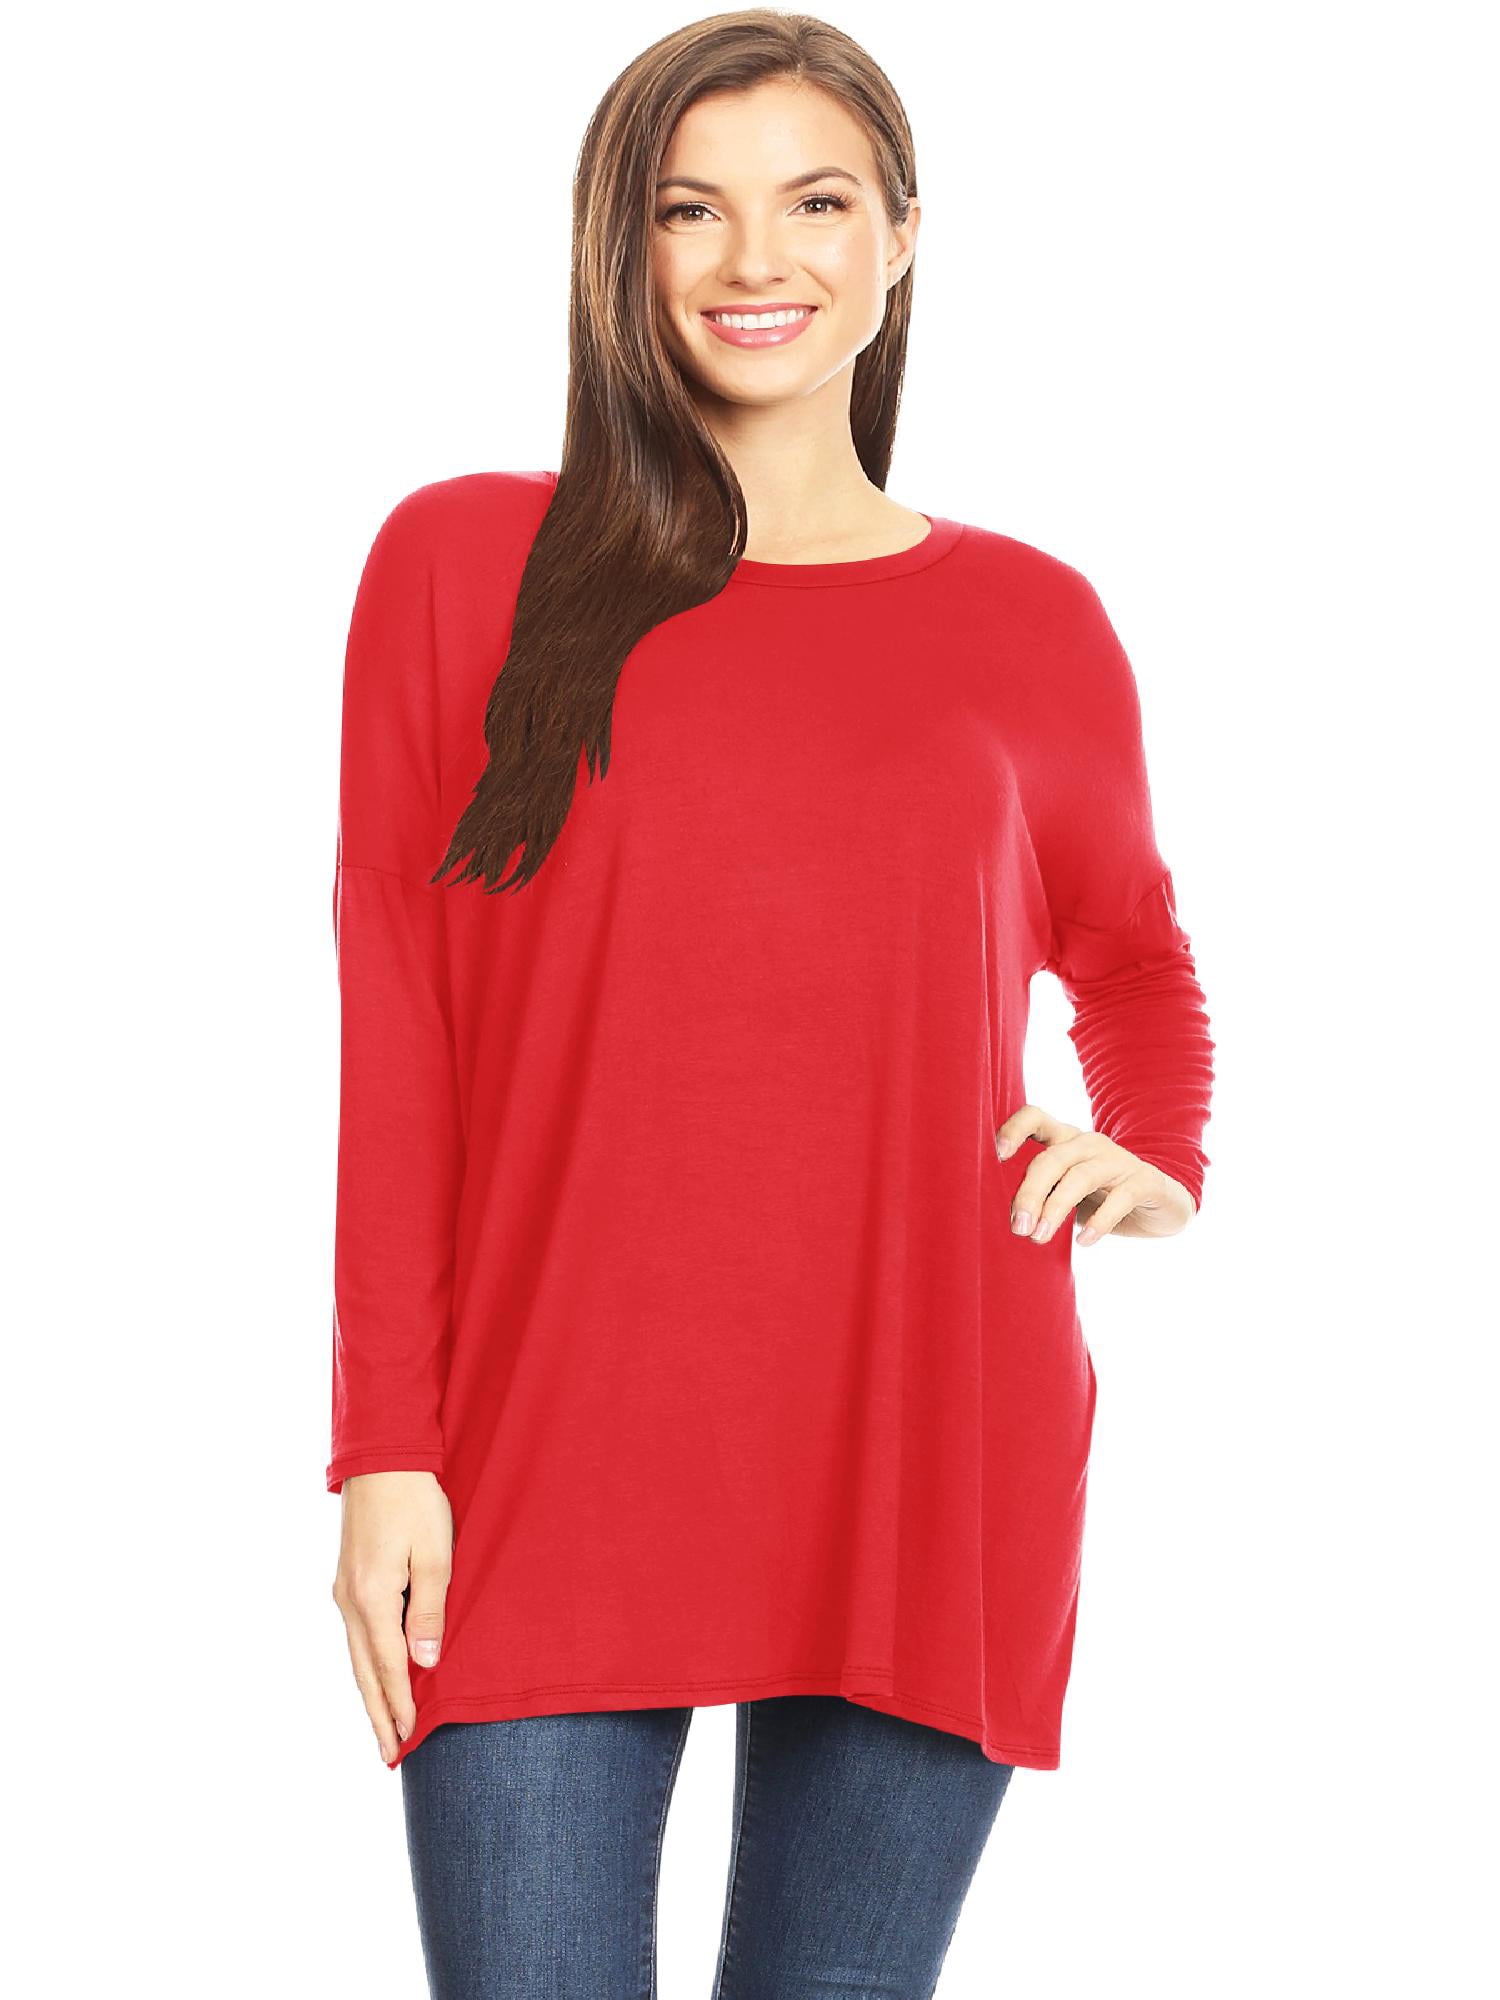 Women's Solid Casual Basic Dolman Long Sleeve Relaxed Fit Tunic Top Tee ...